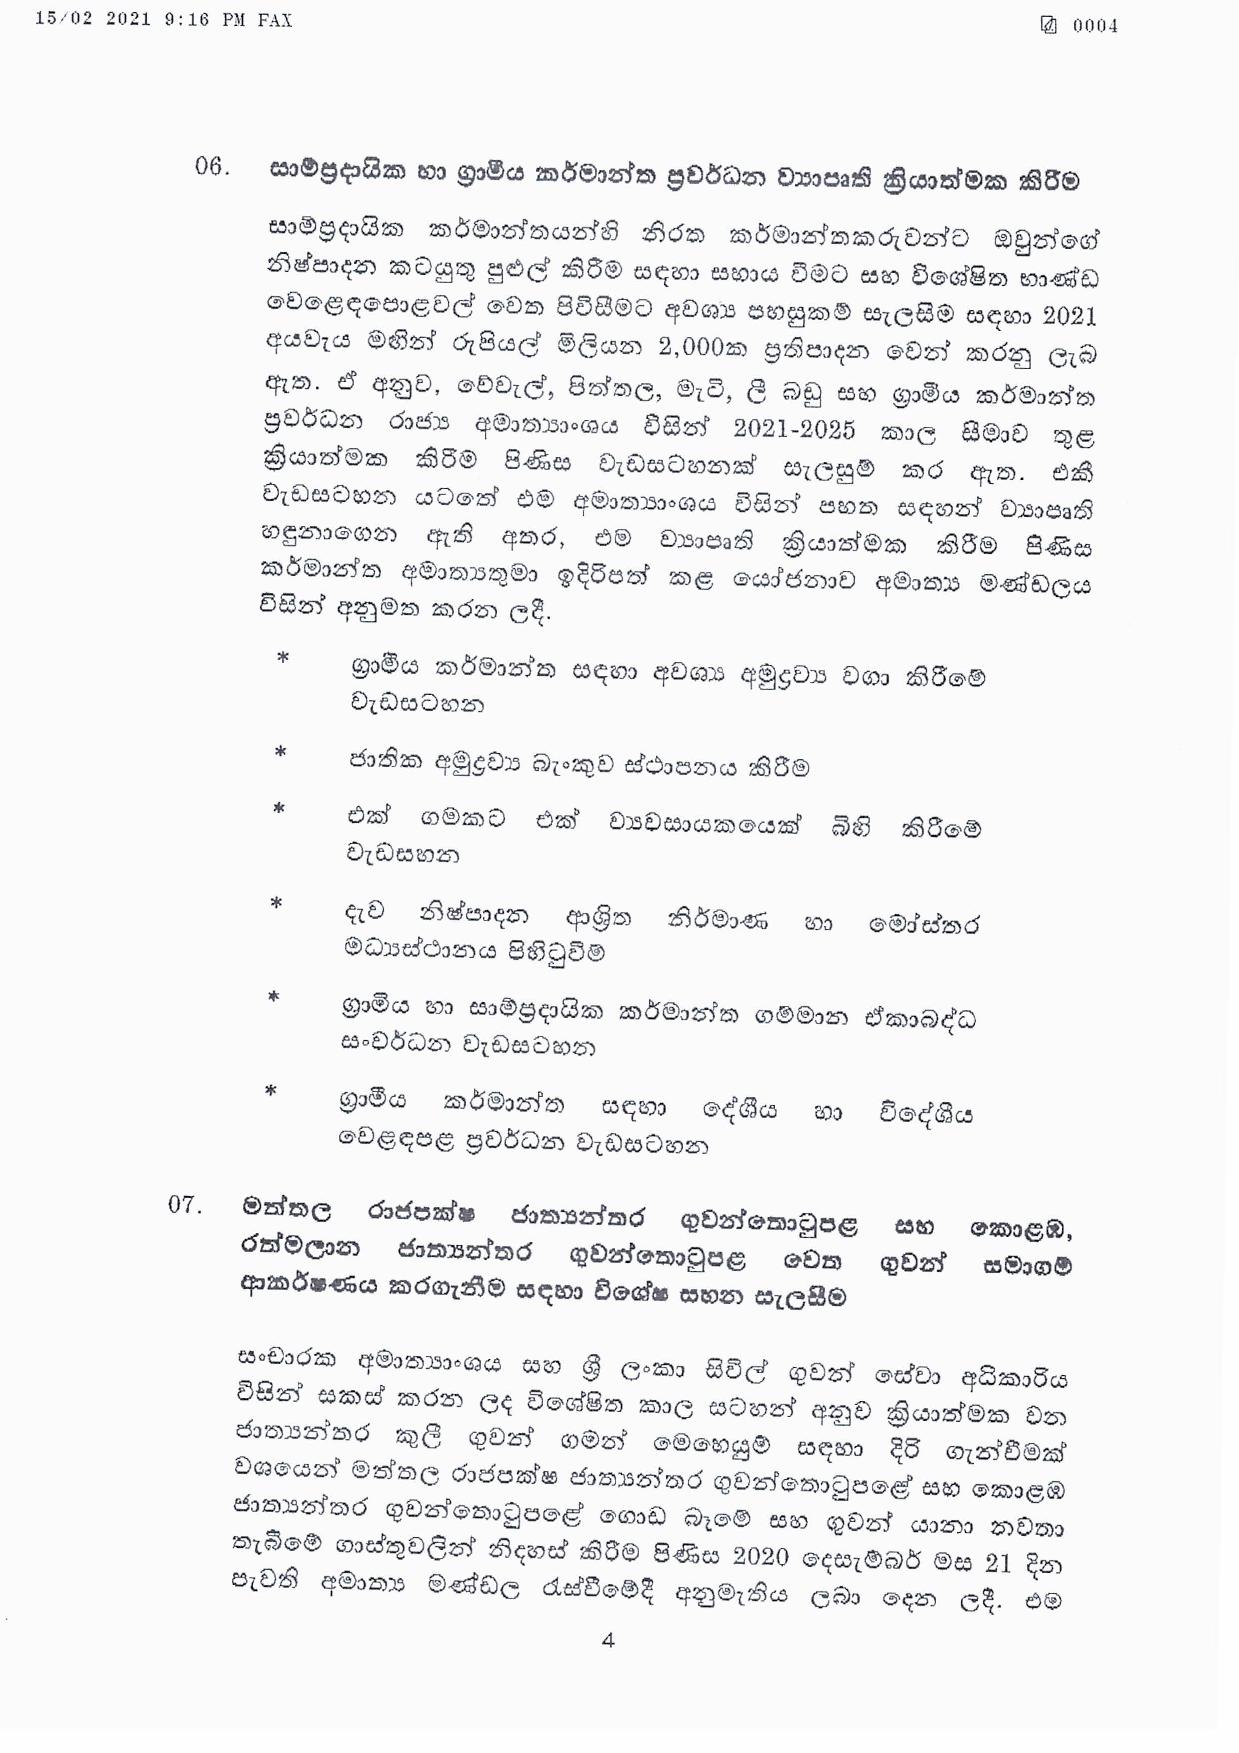 Cabinet Decision on 15.02.2021 page 004